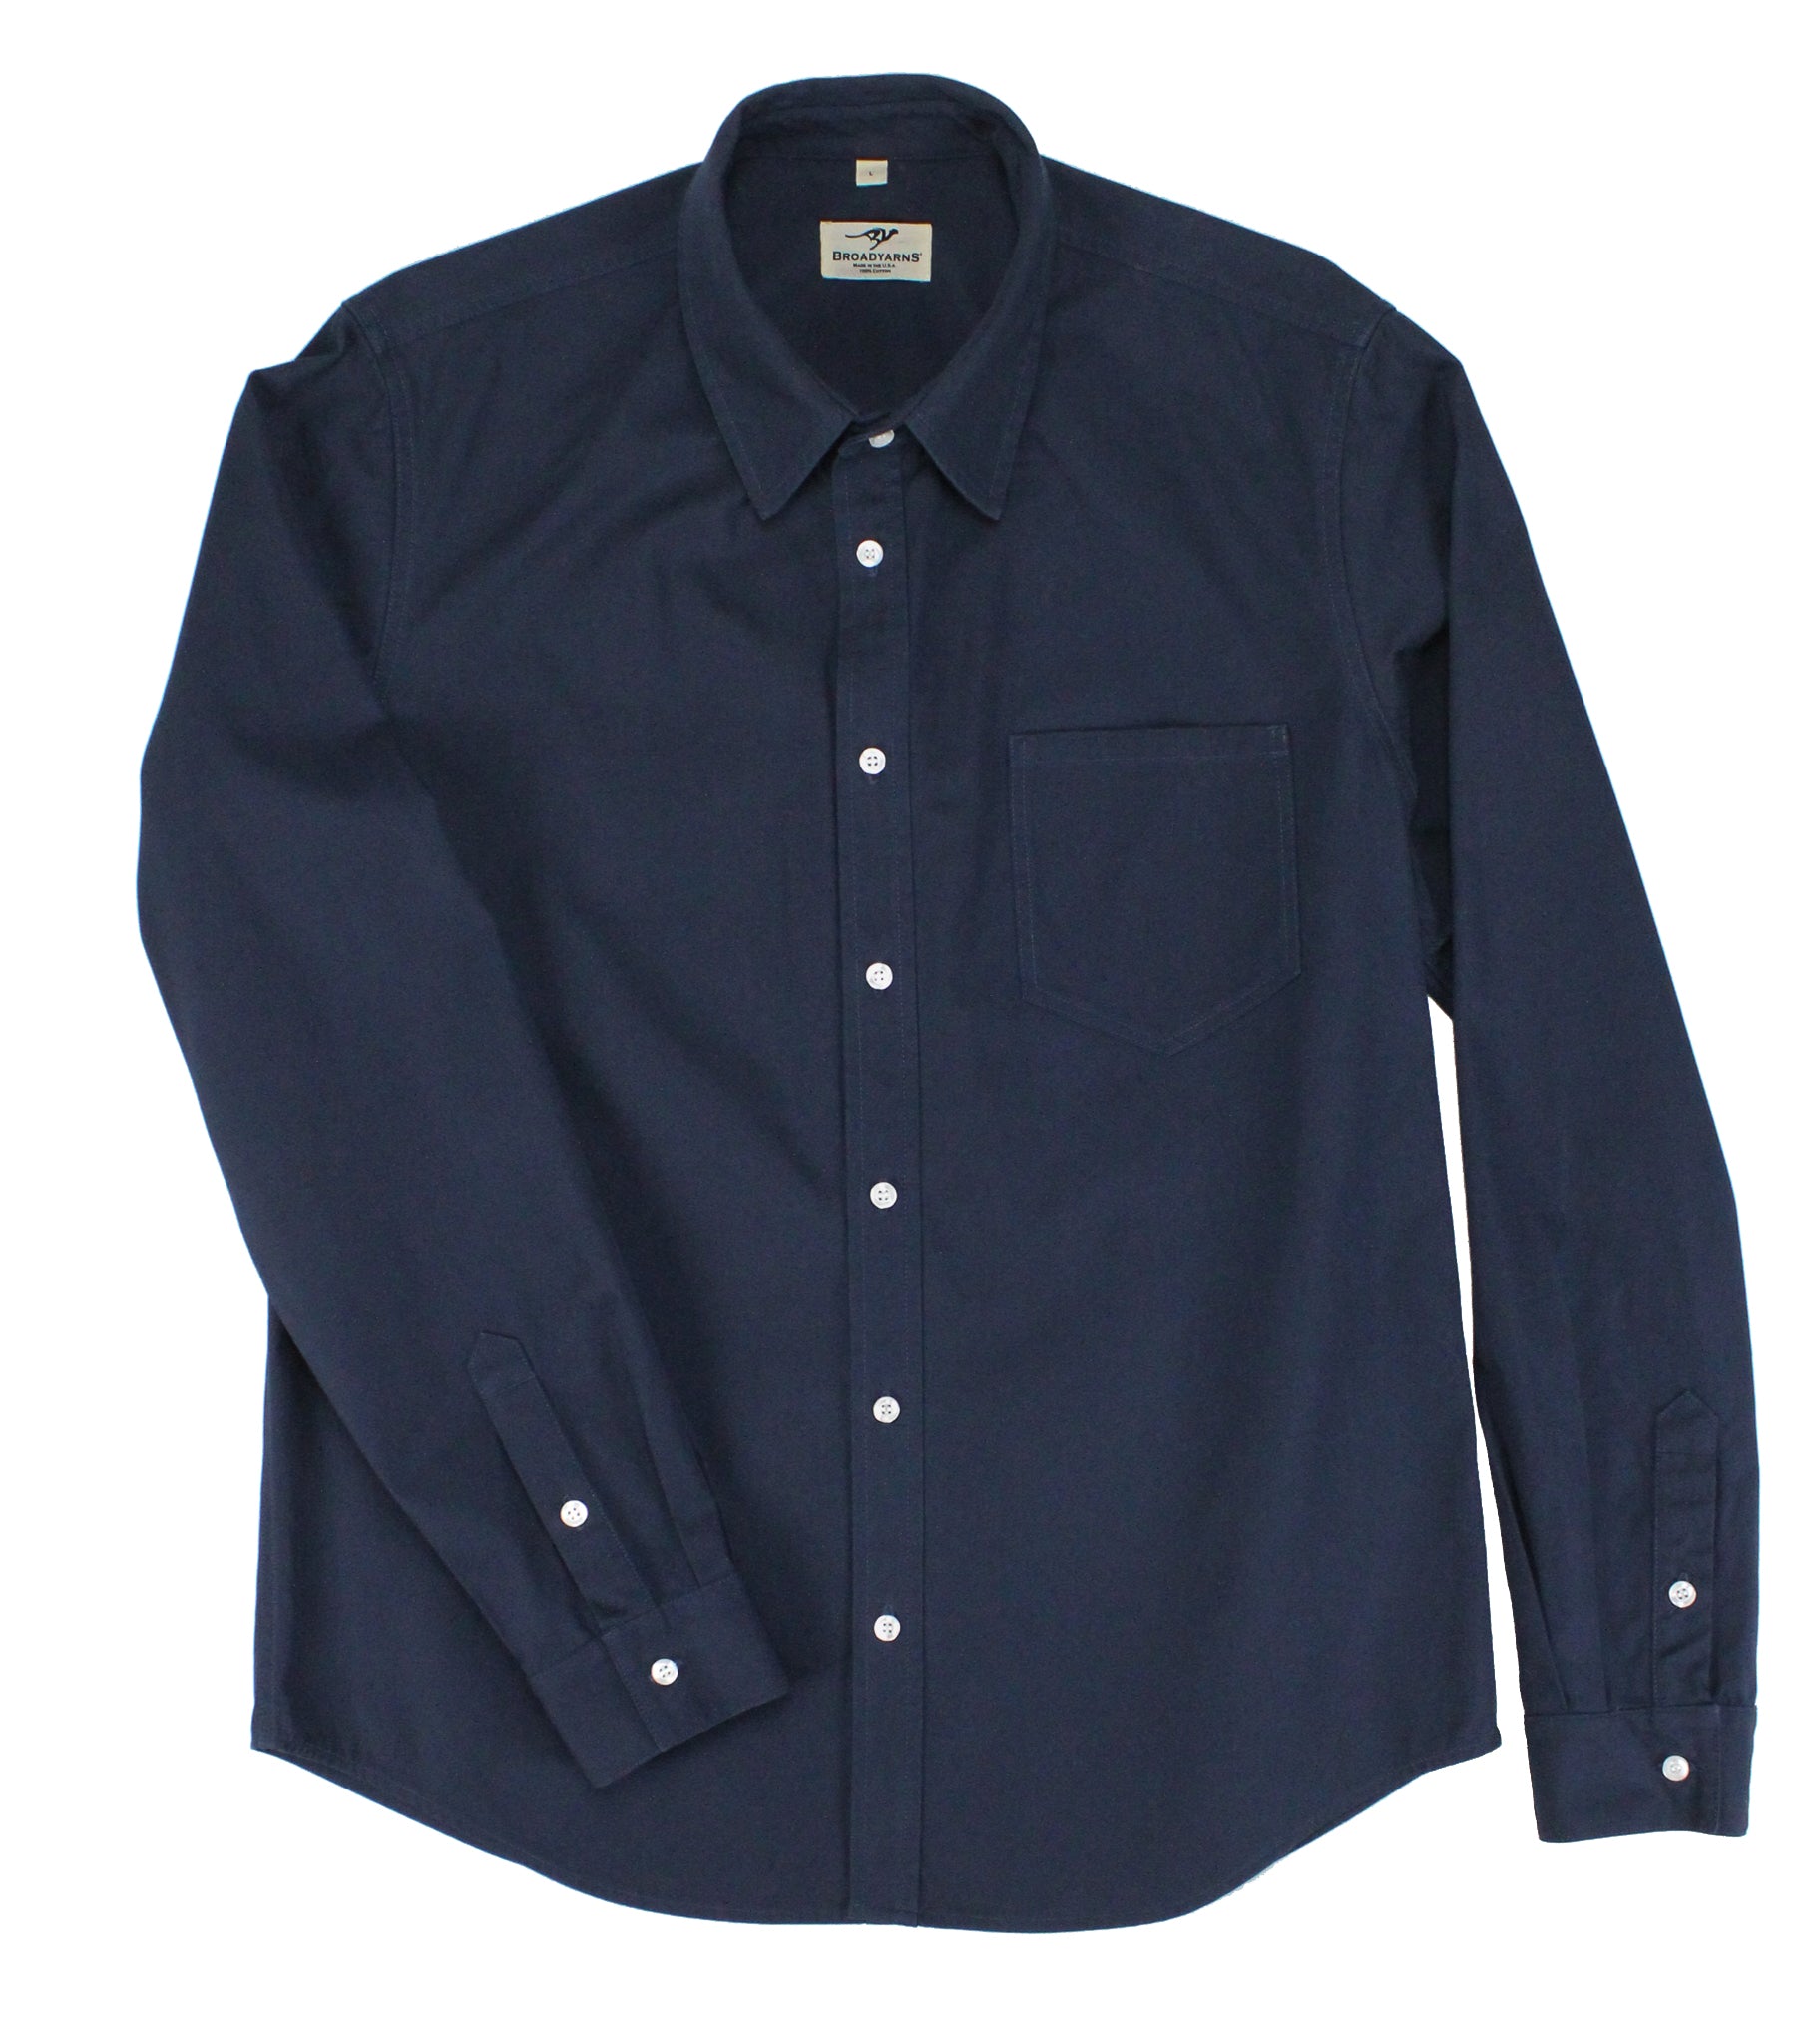 luxury long sleeve button down shirt with extra long sleeves